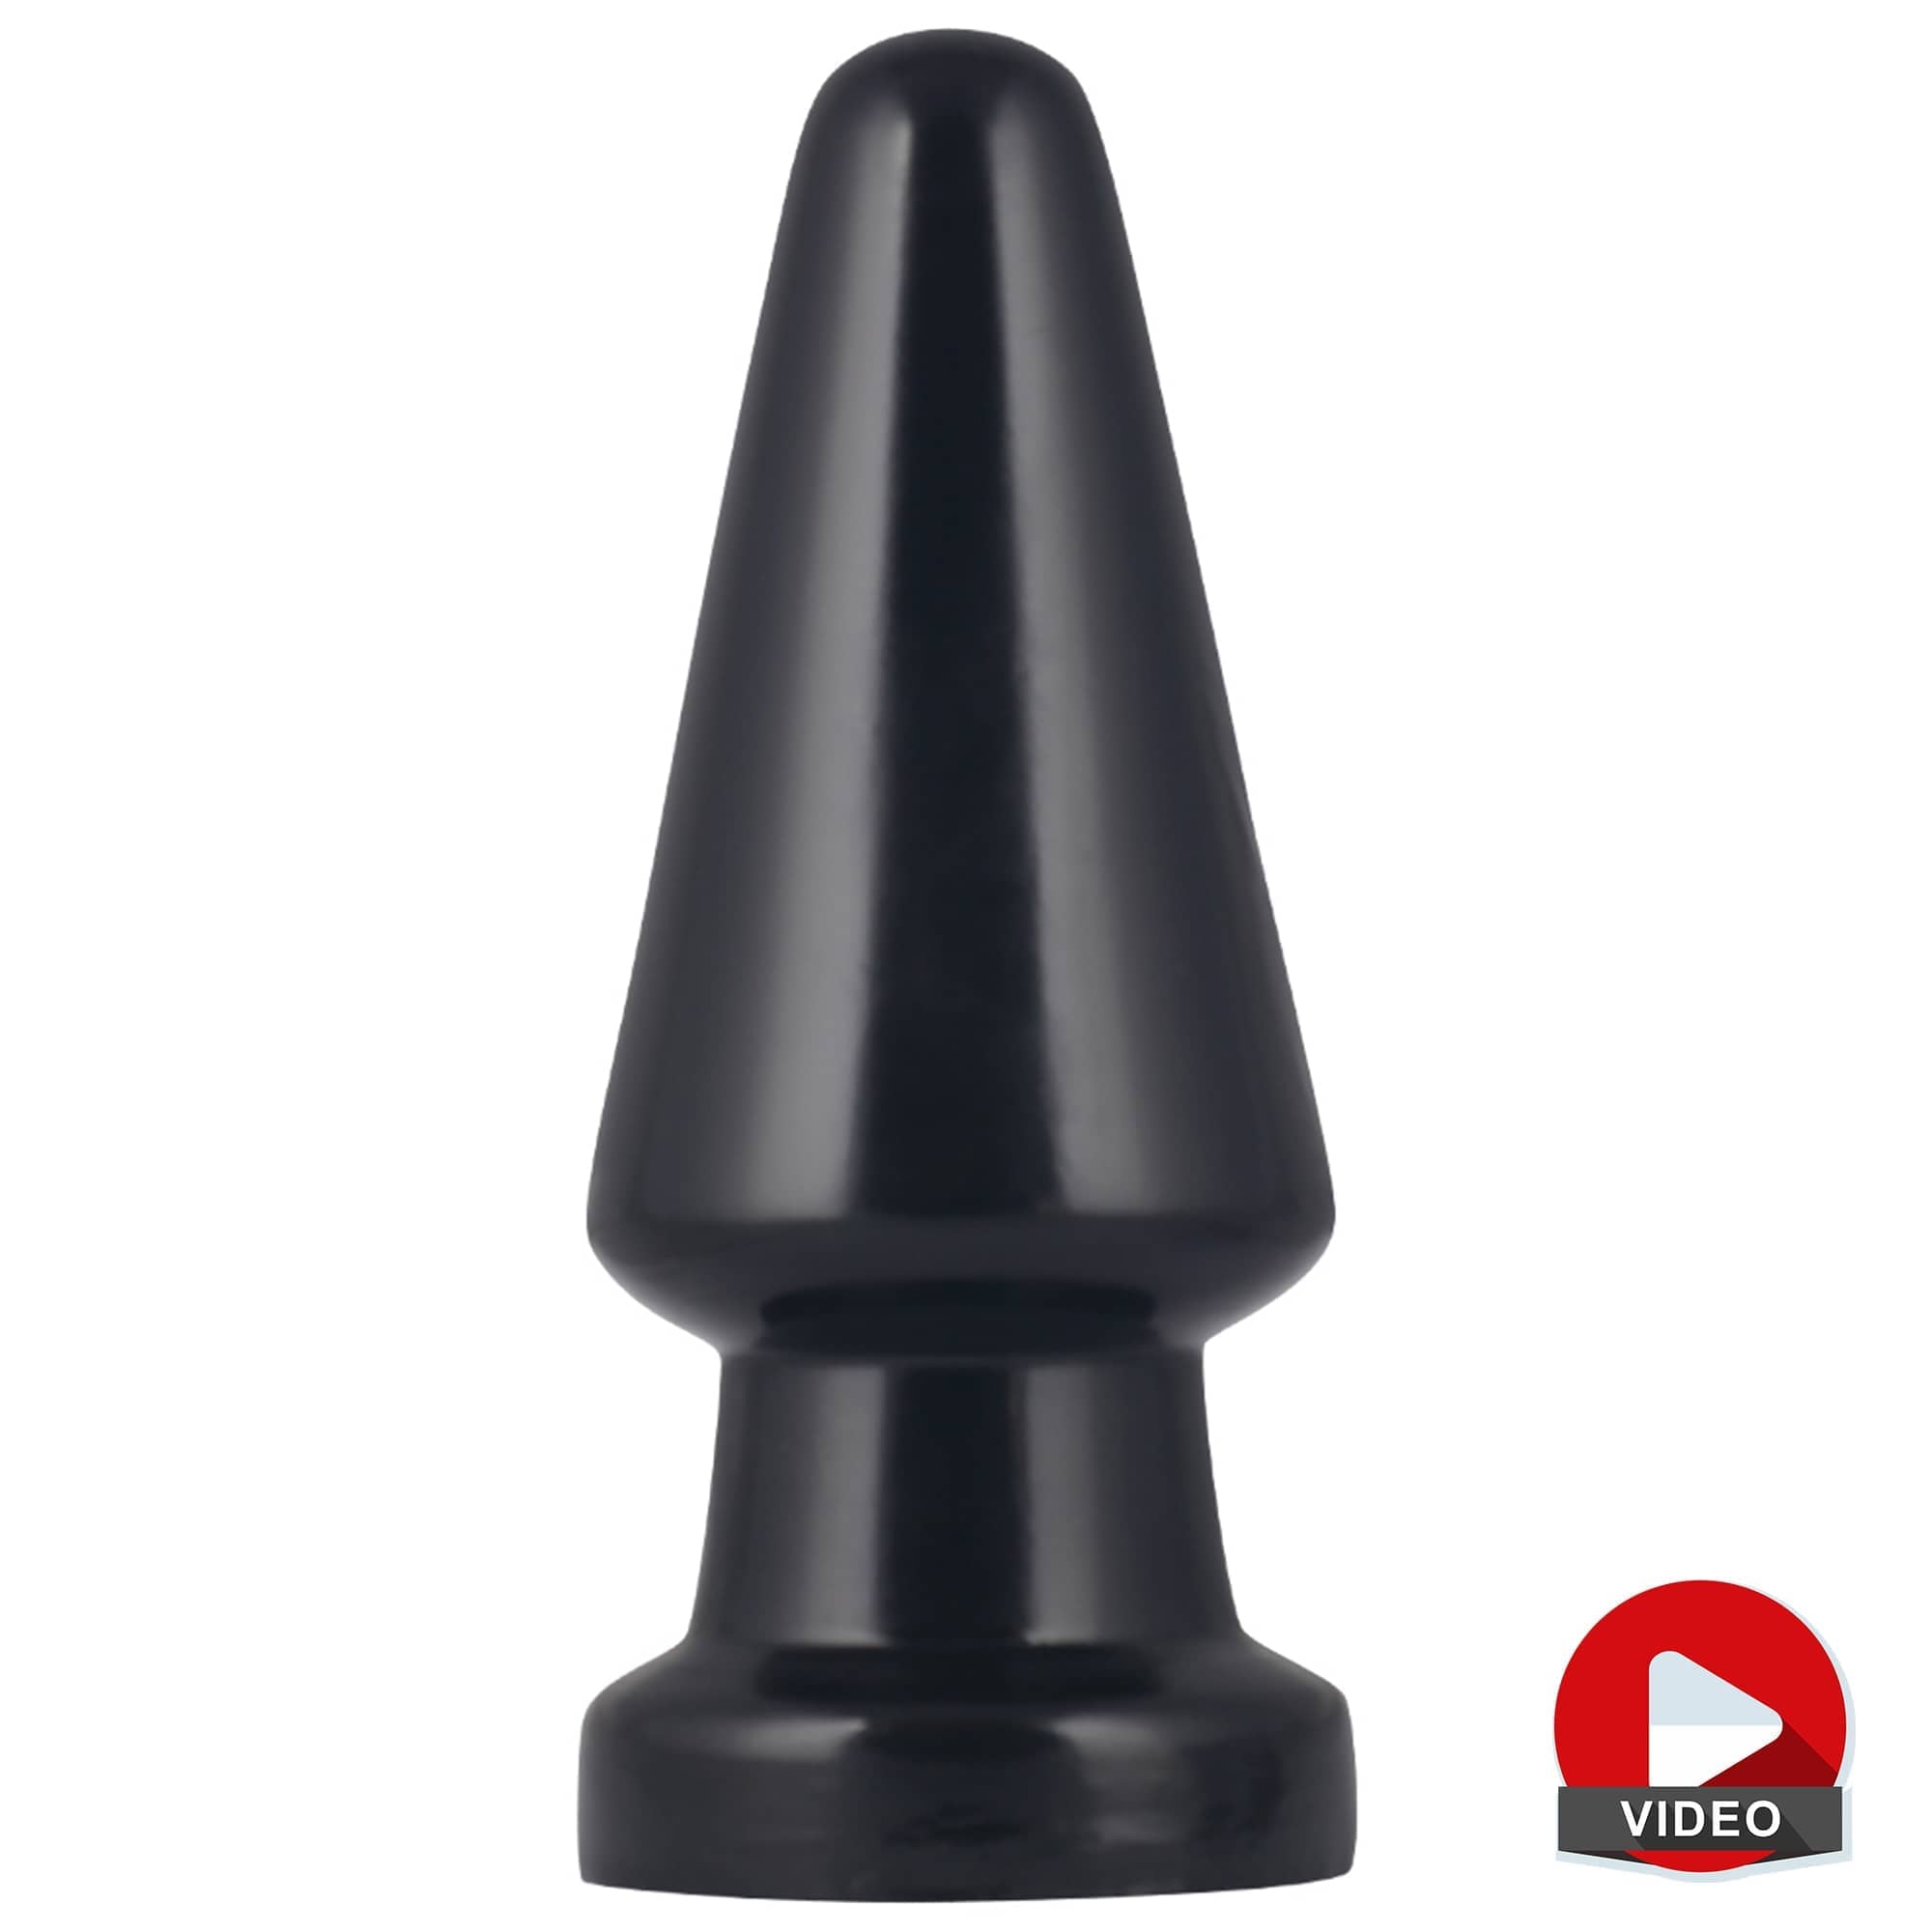 The 7 inches anal shocker large butt plug is upright with a video playback logo